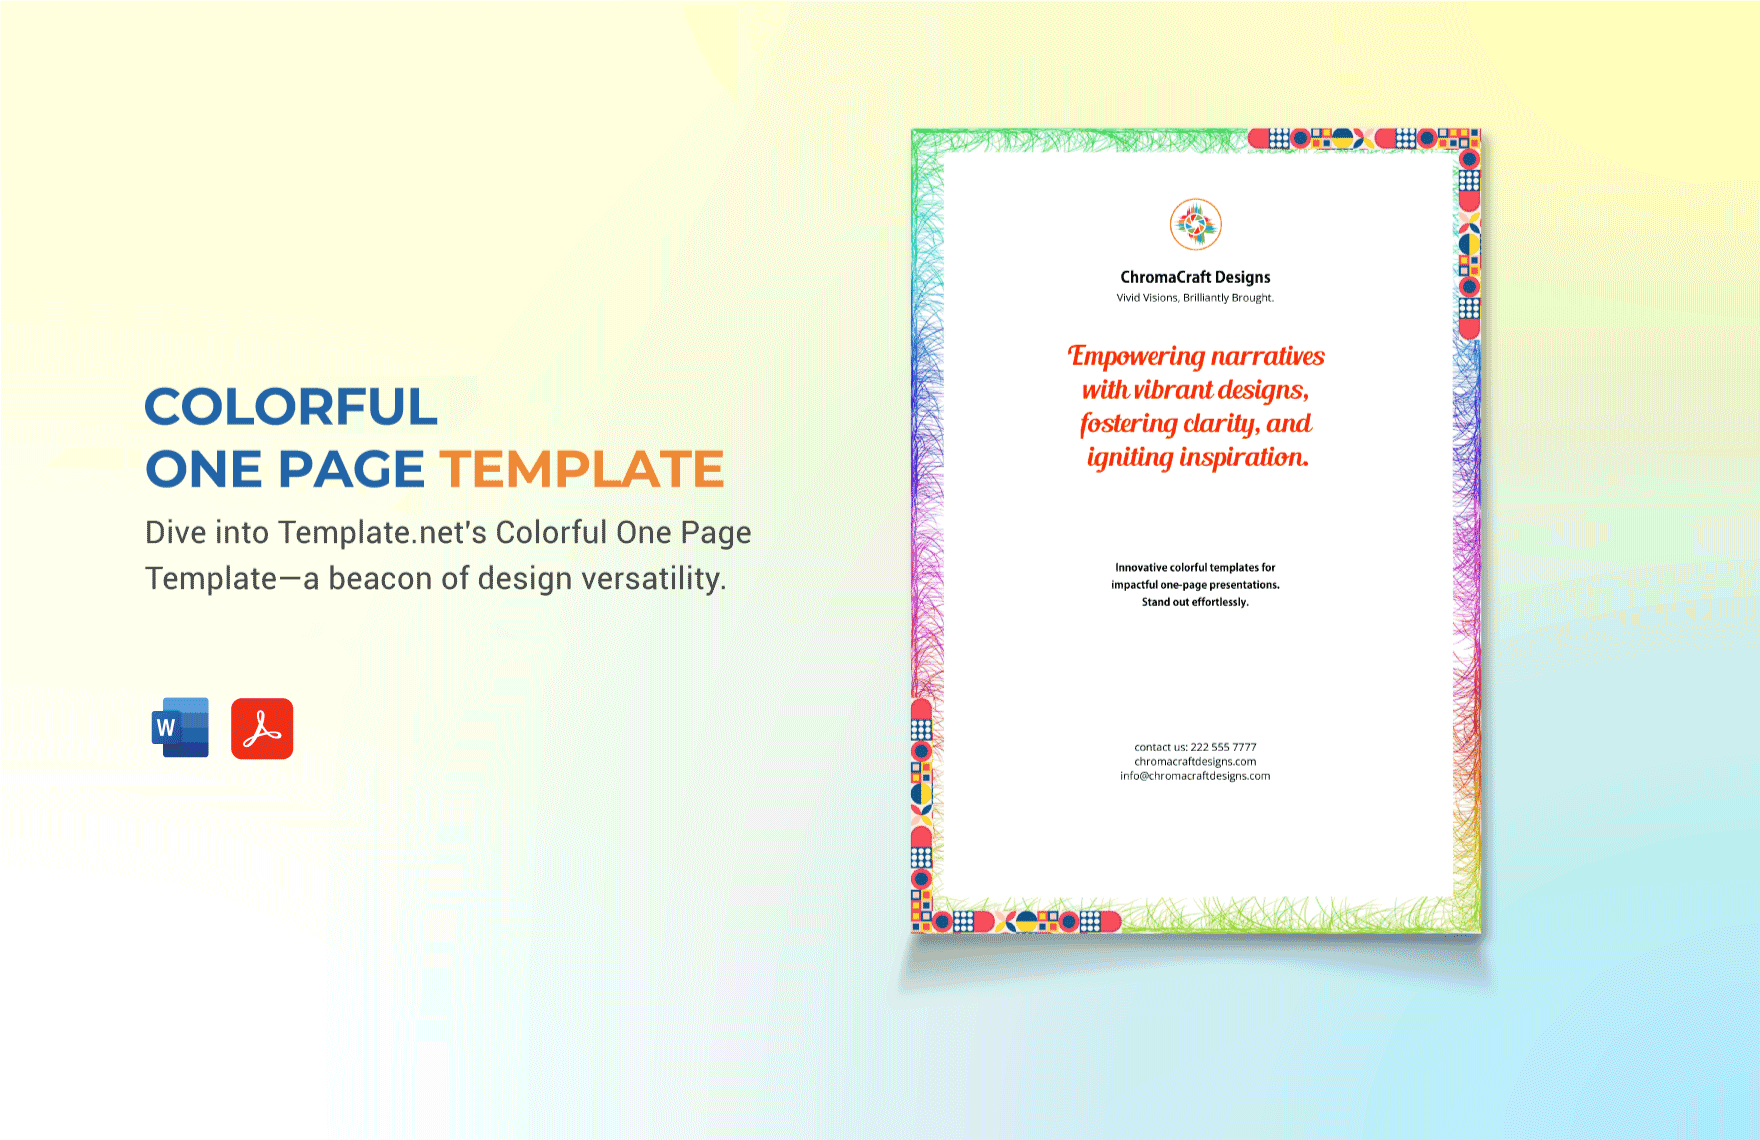 Colorful One Page Template